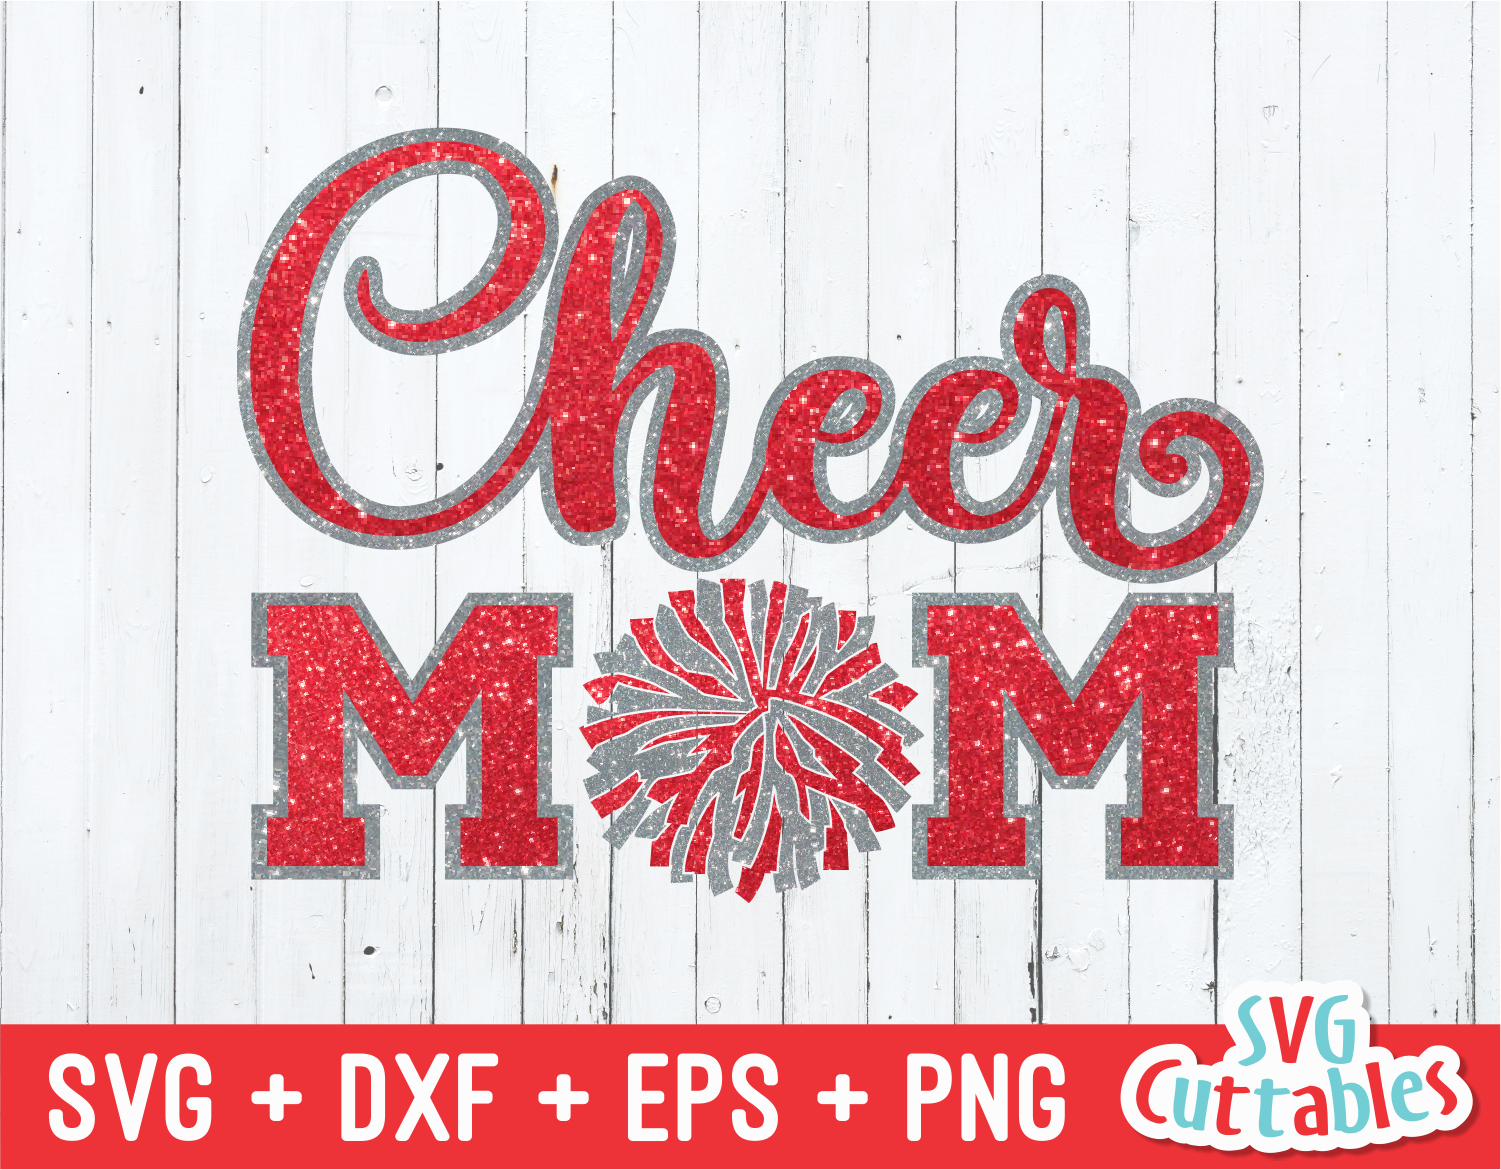 Download Cheer Mom svg Cut File | svgcuttablefiles